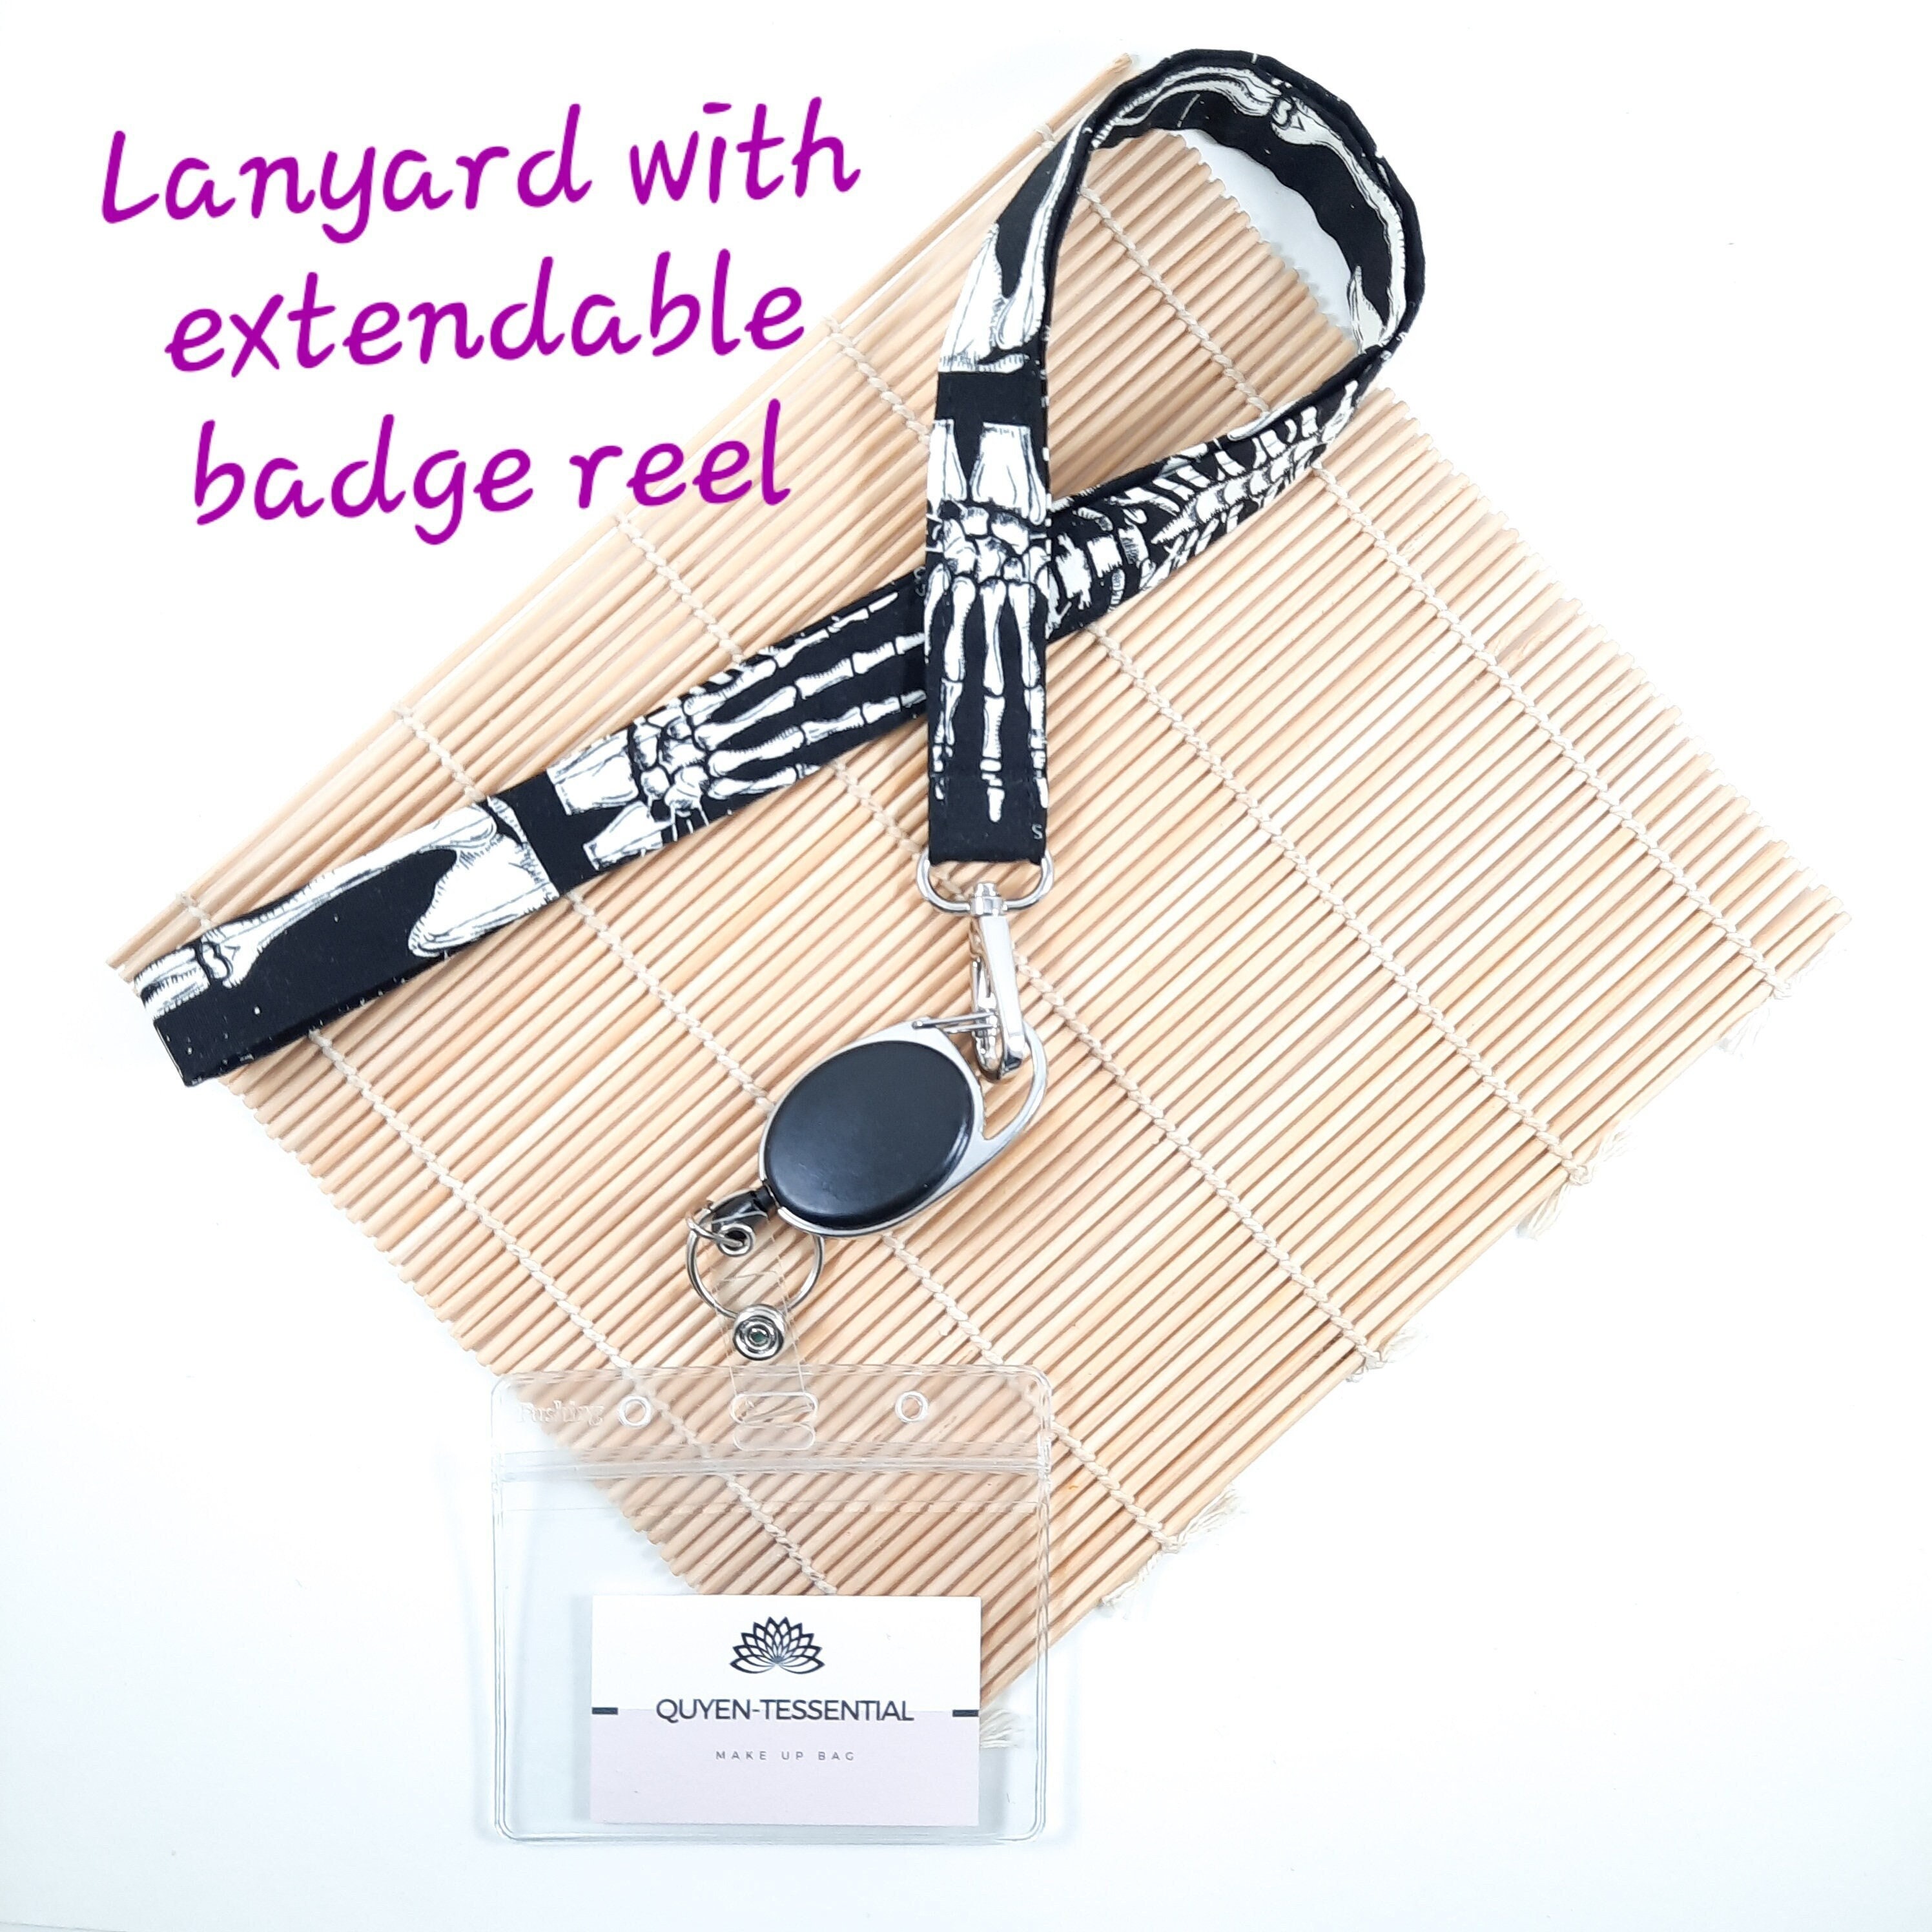 15 Pattern Lanyard With Extendable Badge Reel Durable and Stylish